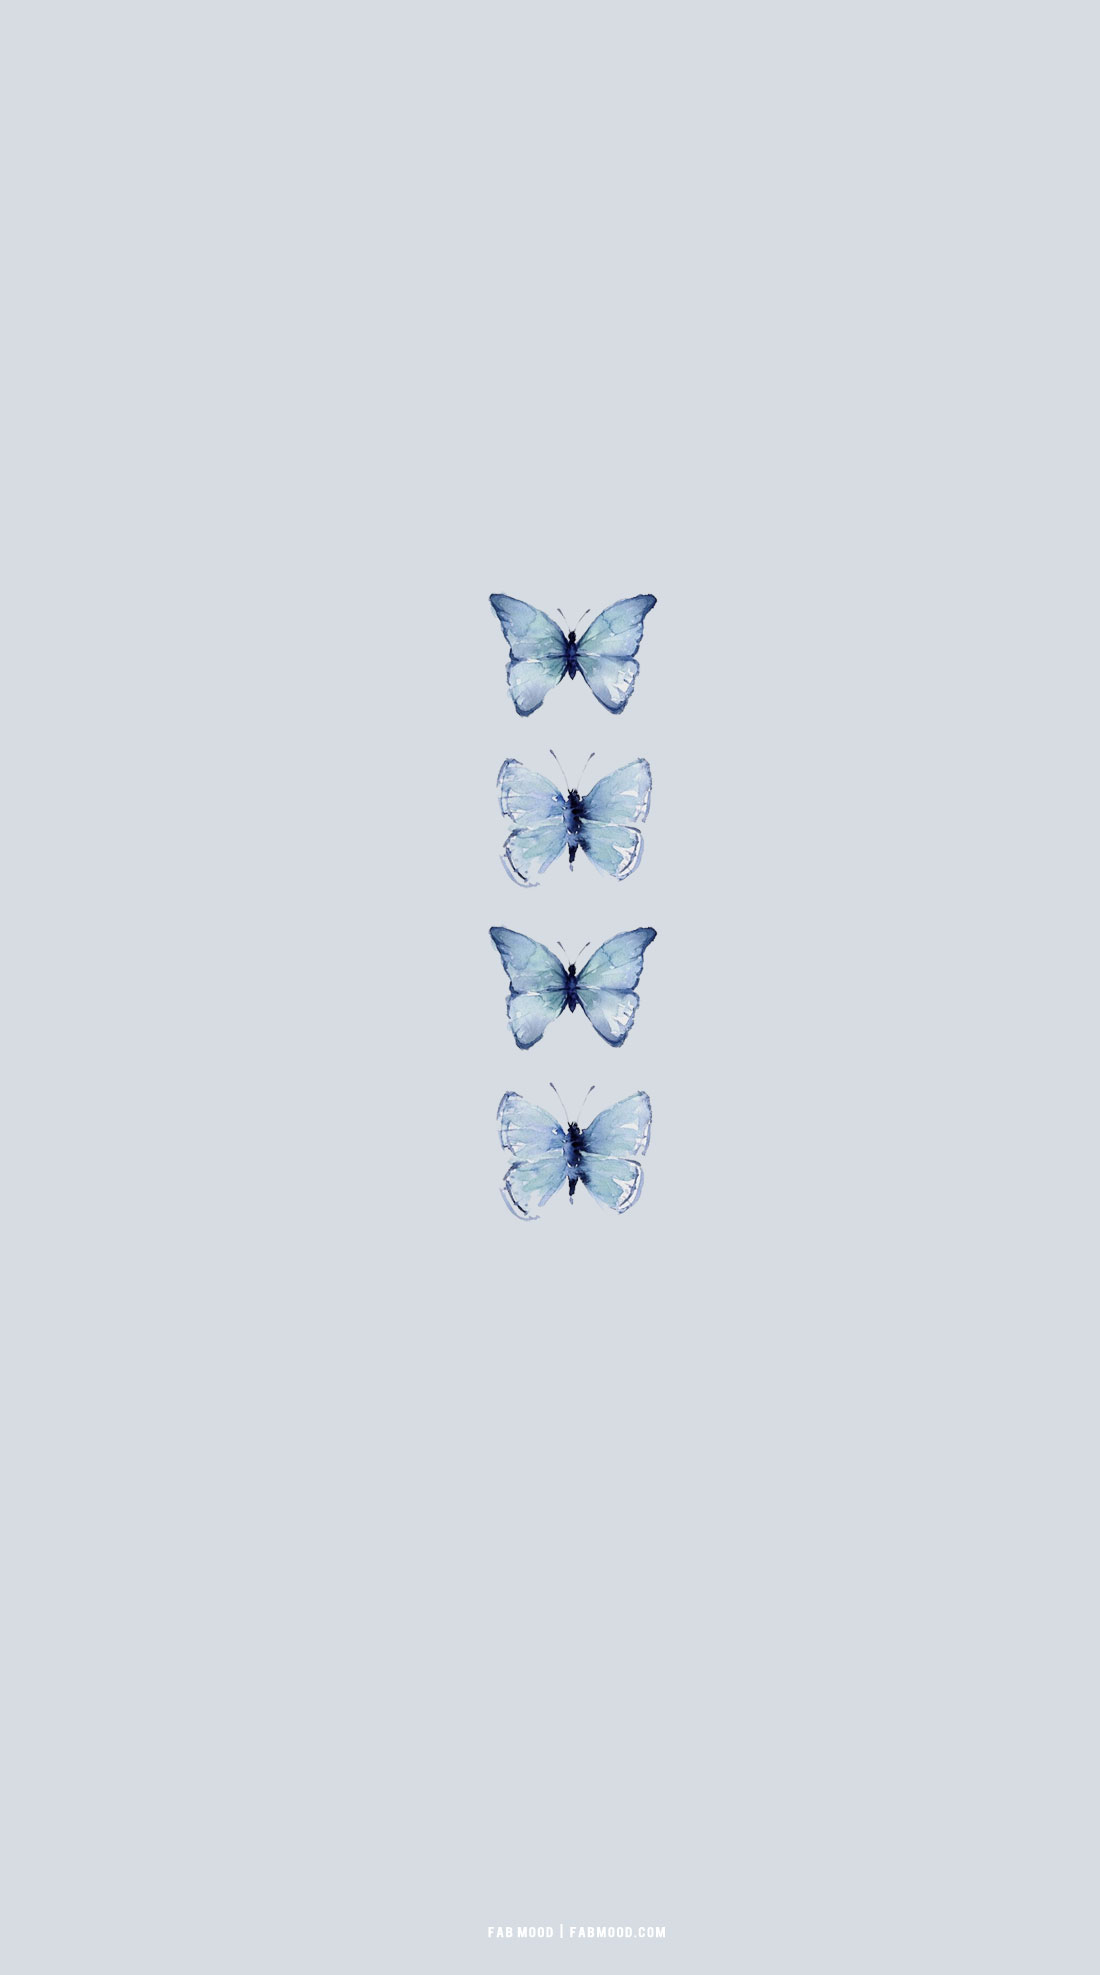 40 Blue Wallpaper Designs for Phone : Blue Butterfly Blue Background